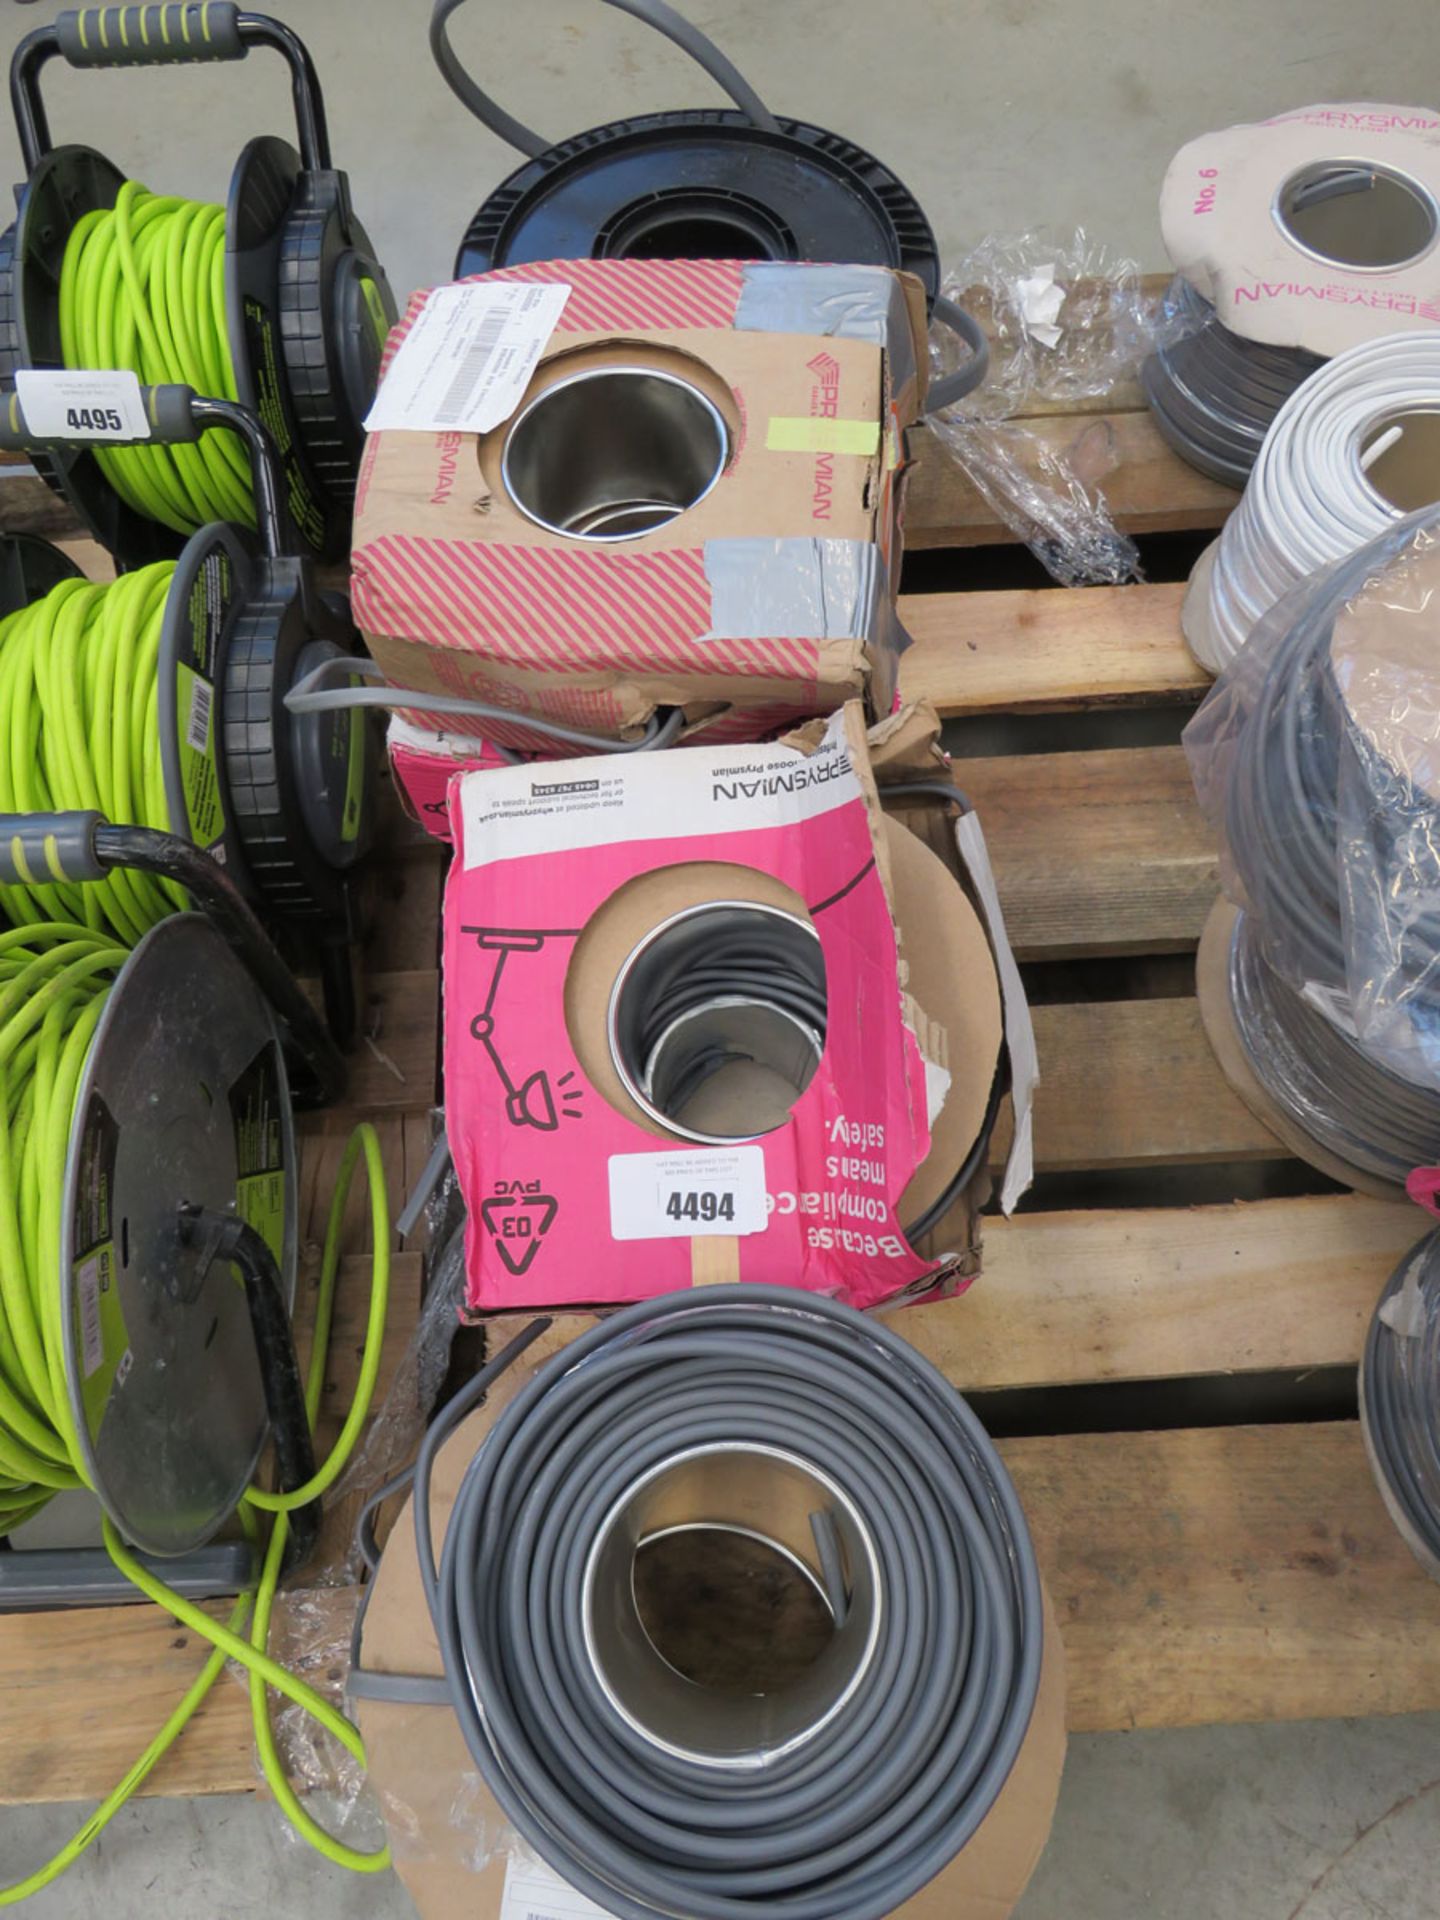 8 assorted reels of electrical cable